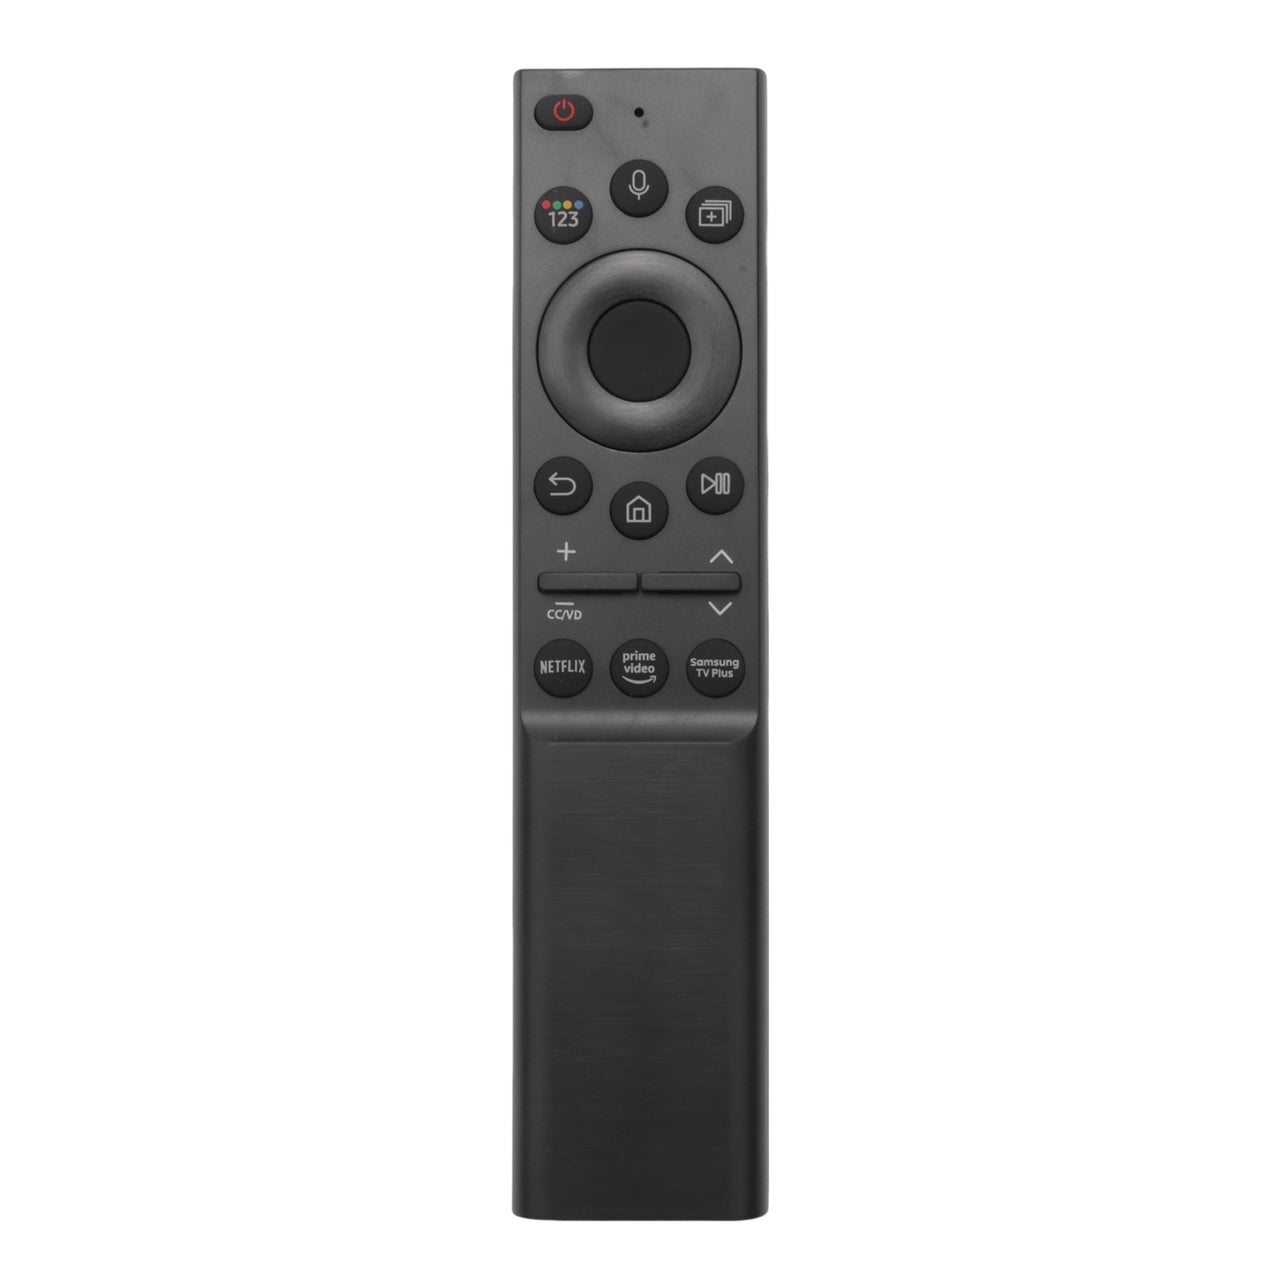 BN59-01357F Voice Replacement Remote for Samsung Televisions